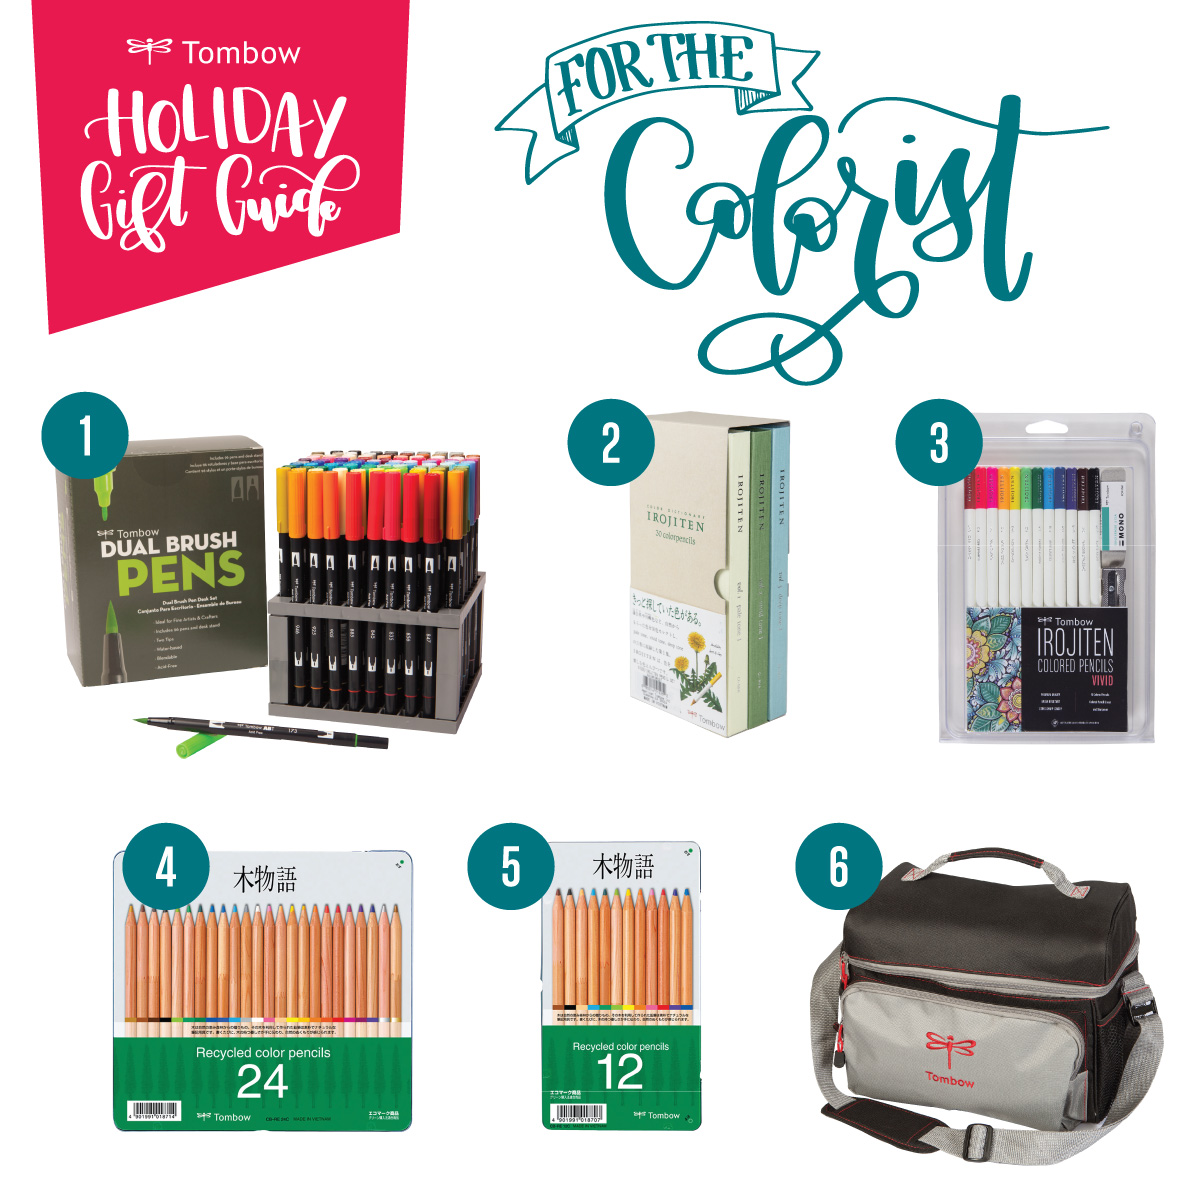 Coloring gifts from Tombow | Tombow Holiday Gift Guide | The best gifts for colorists from @tombowusa